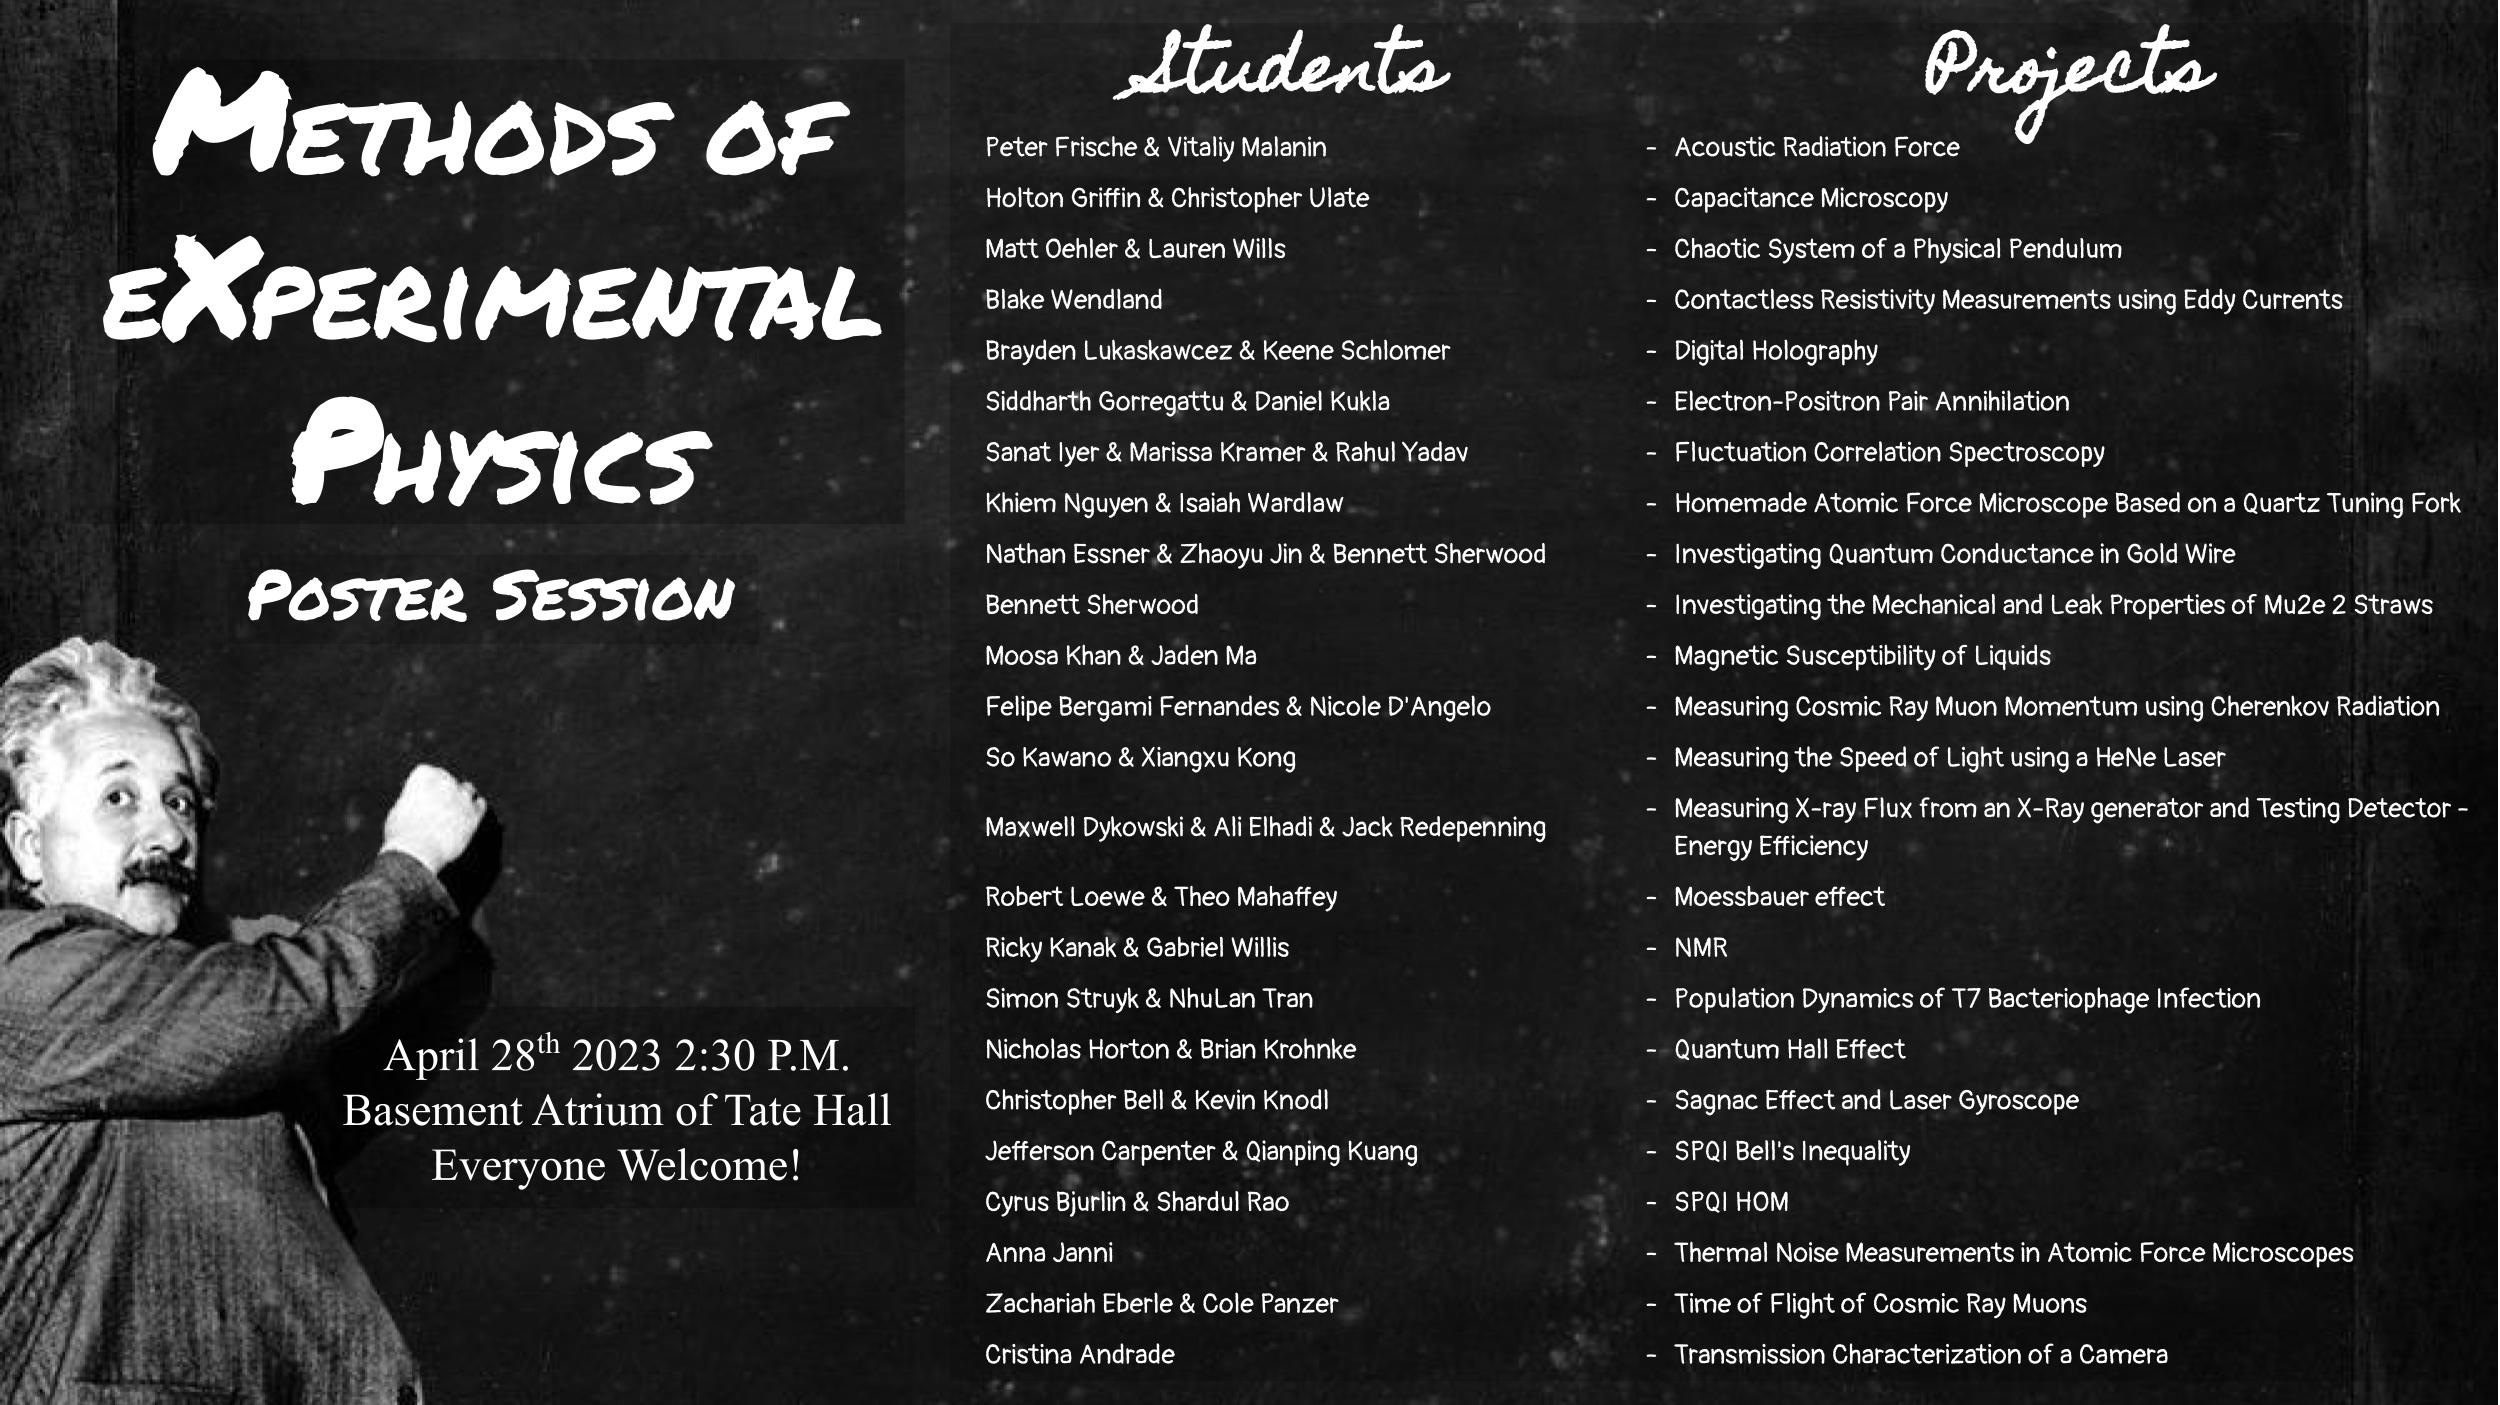 Image with names of students and their projects on a blackboard. 